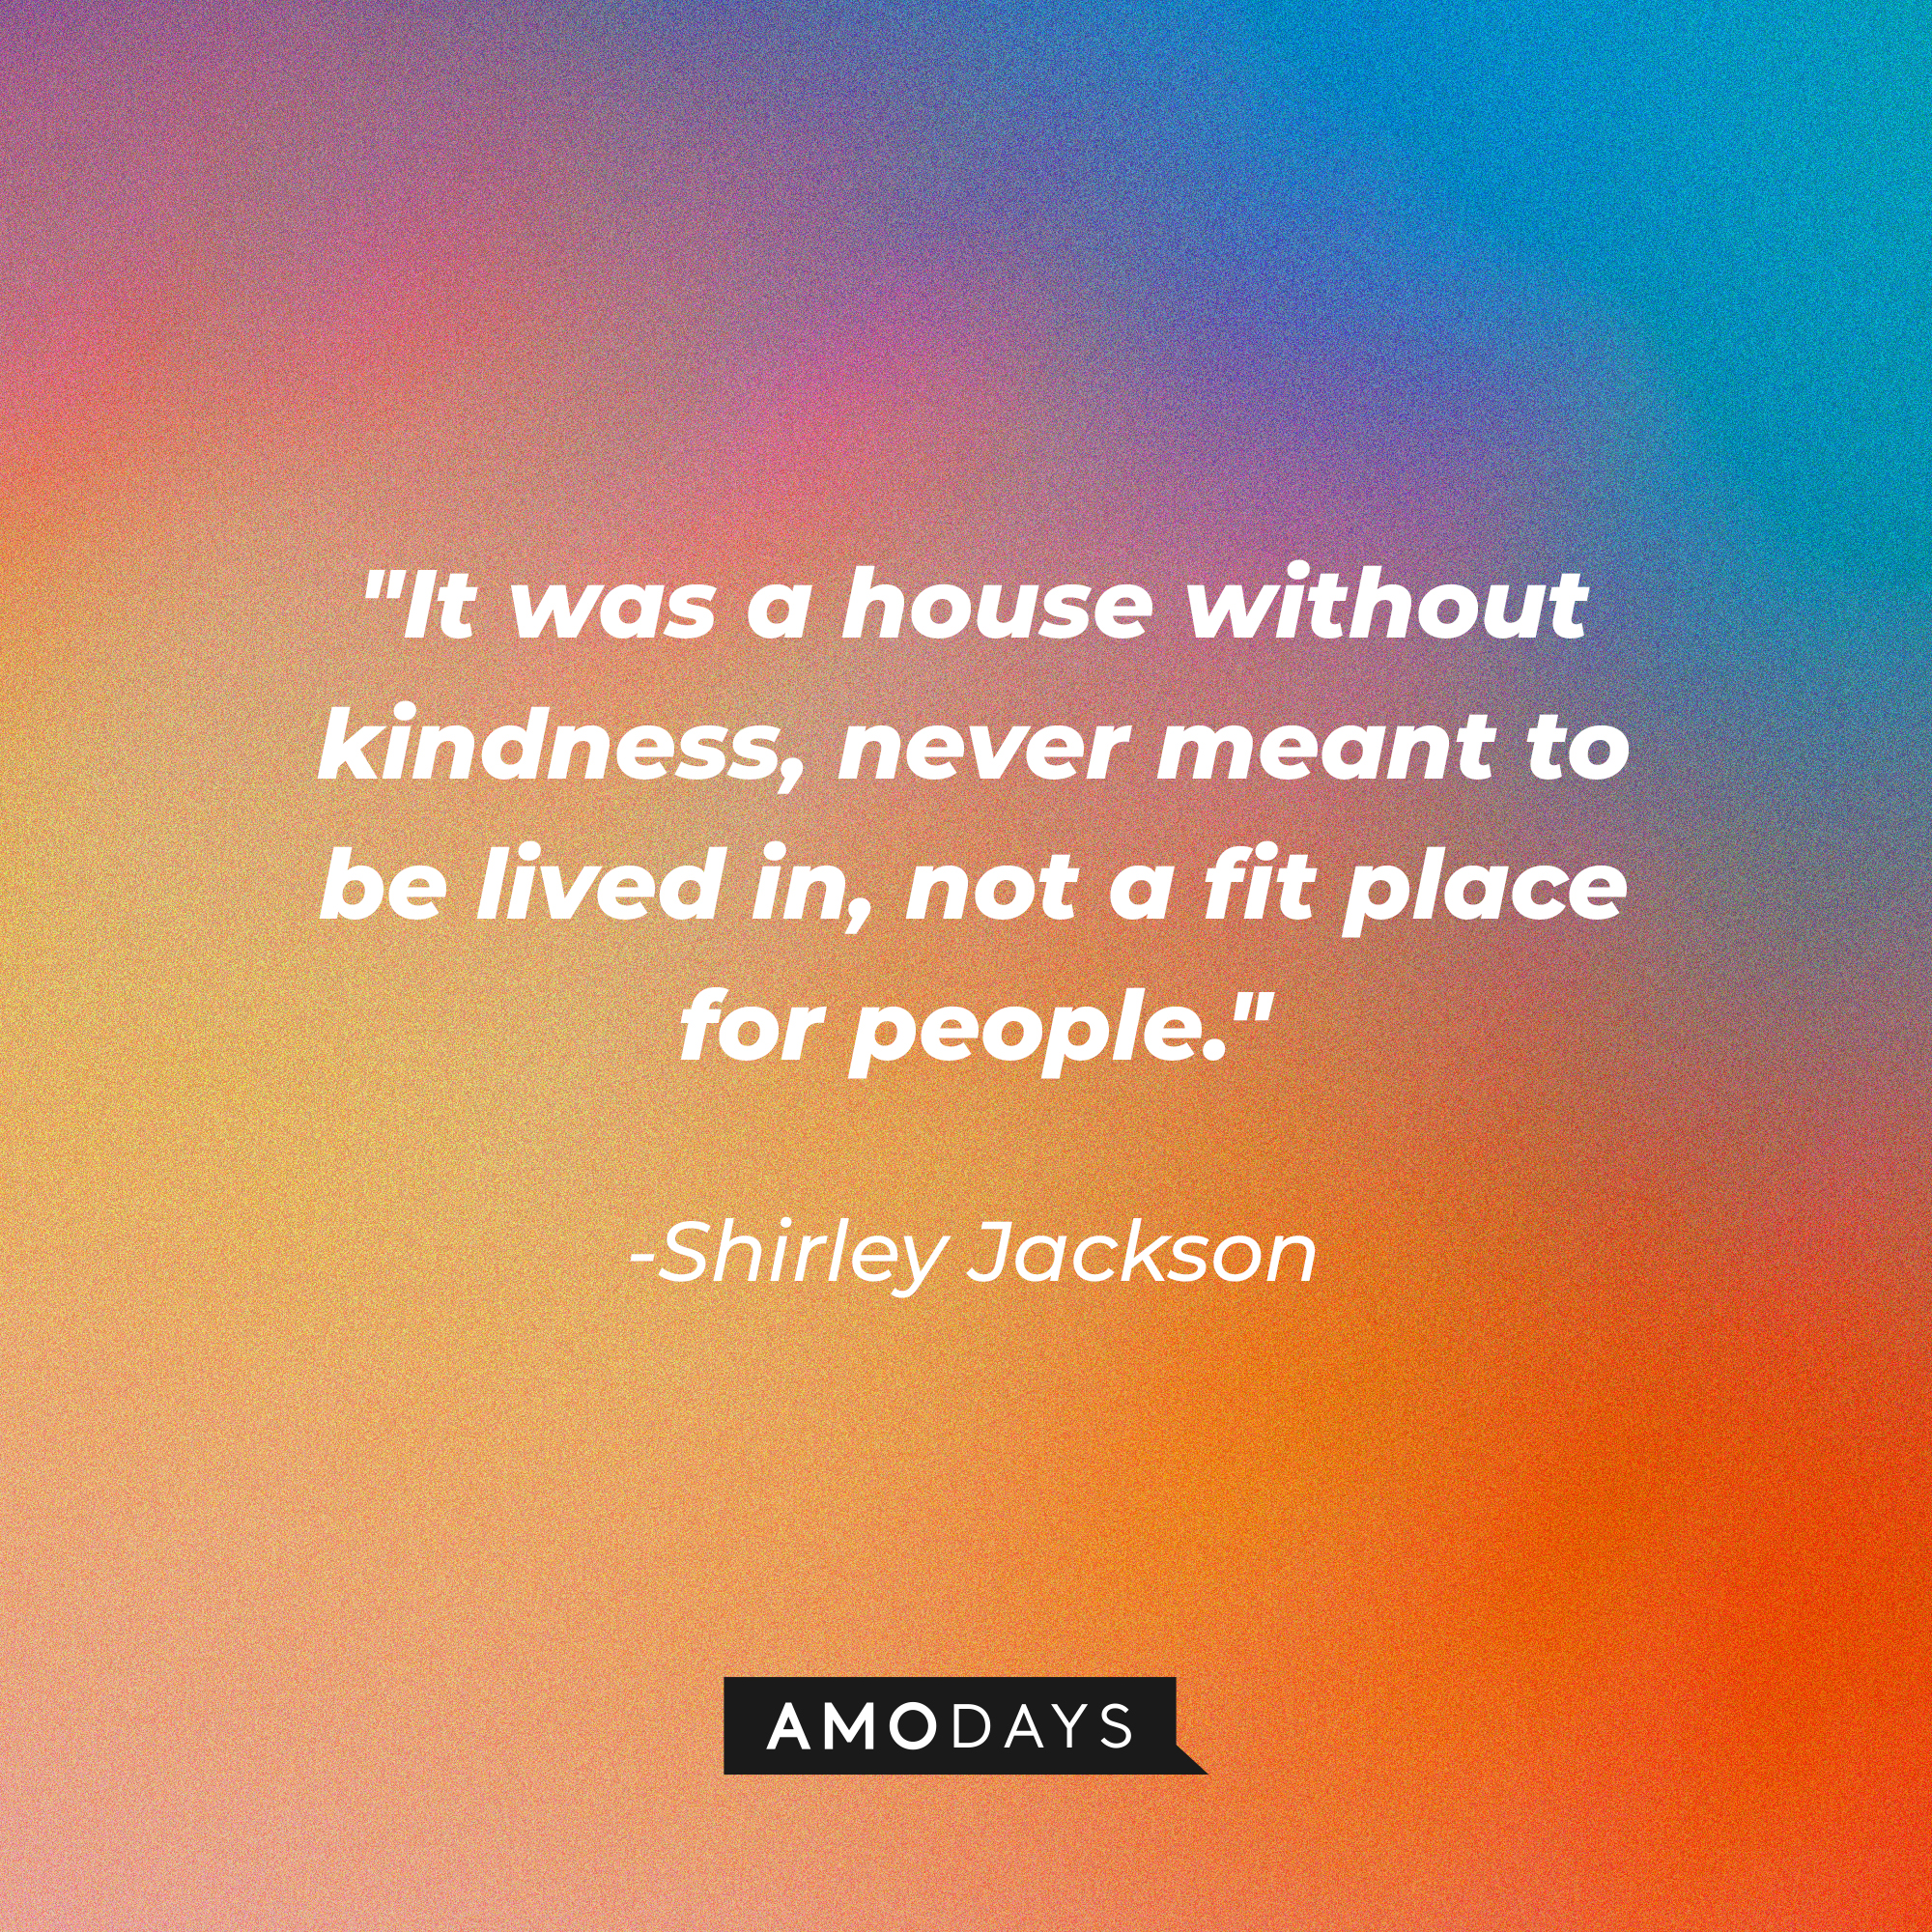 Shirley Jackson's quote: "It was a house without kindness, never meant to be lived in, not a fit place for people." | Image: Amodays